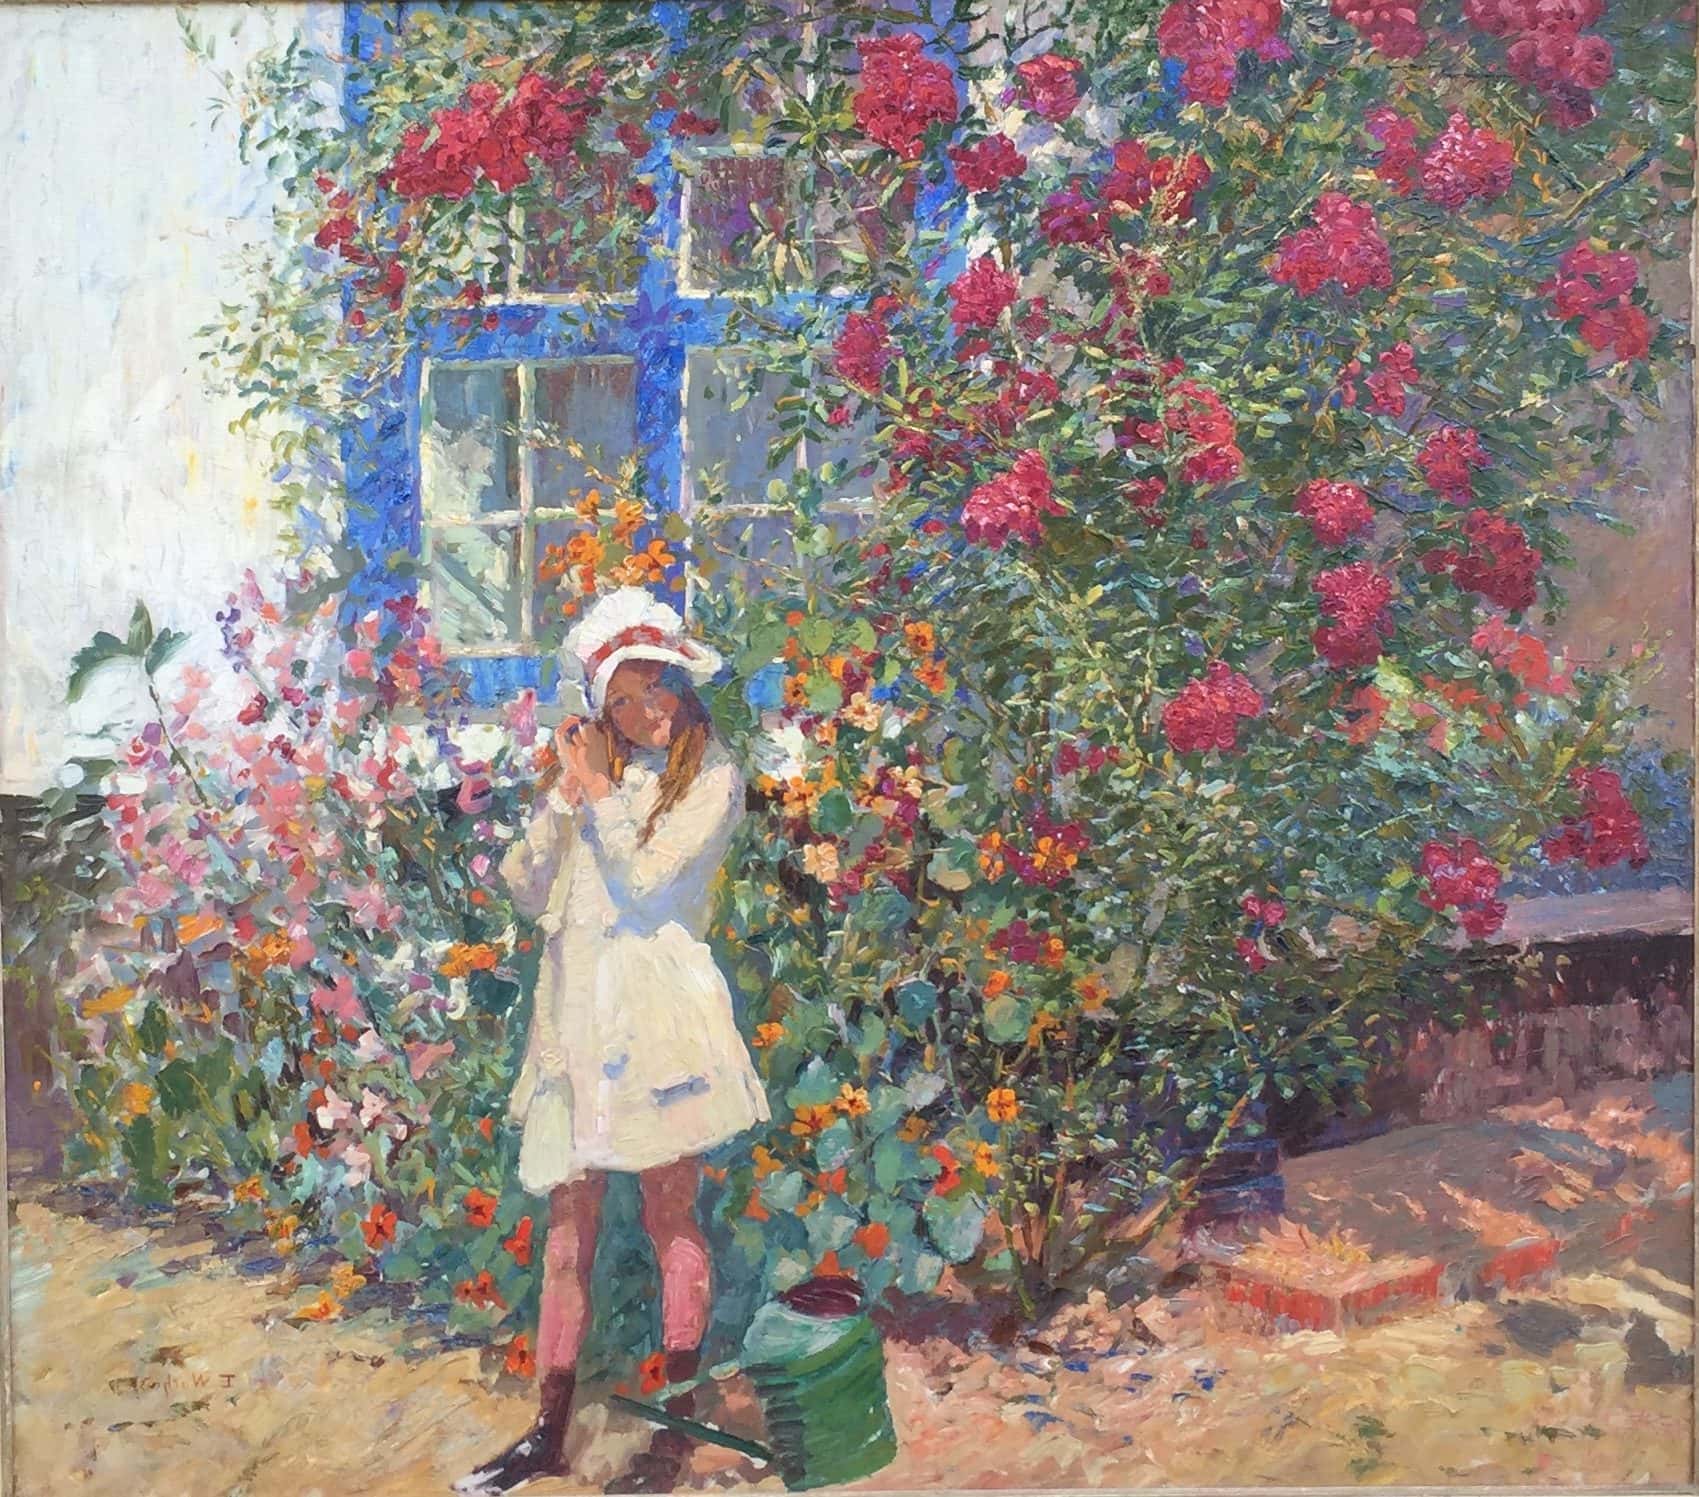 Wiethase. Summer Flowers. A young girl in a white dress and hat stands in front of a zenia bush.